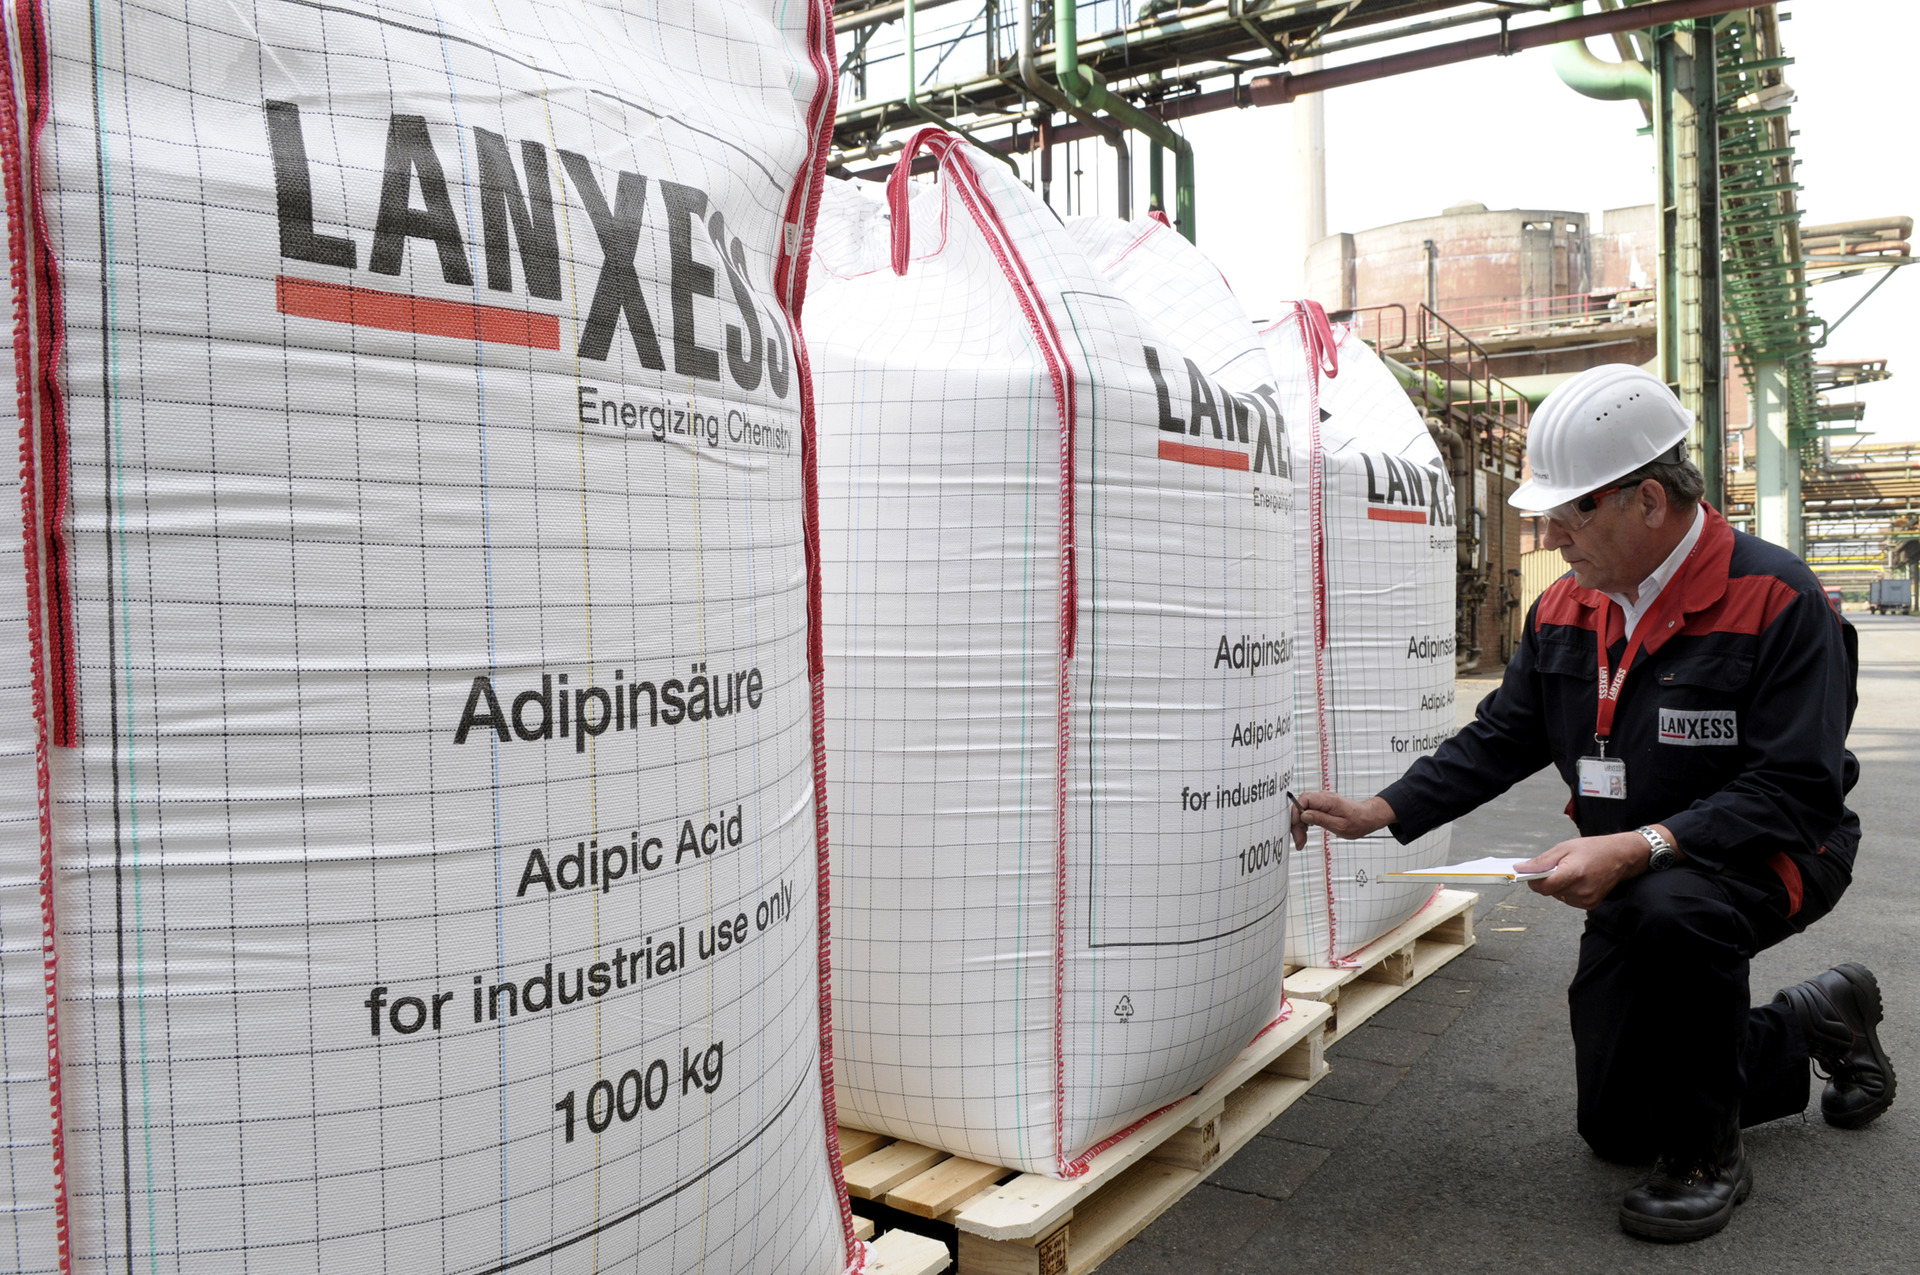 At its site in Krefeld, LANXESS manufactures products such as pigments, high-performance plastics and specialty chemicals.